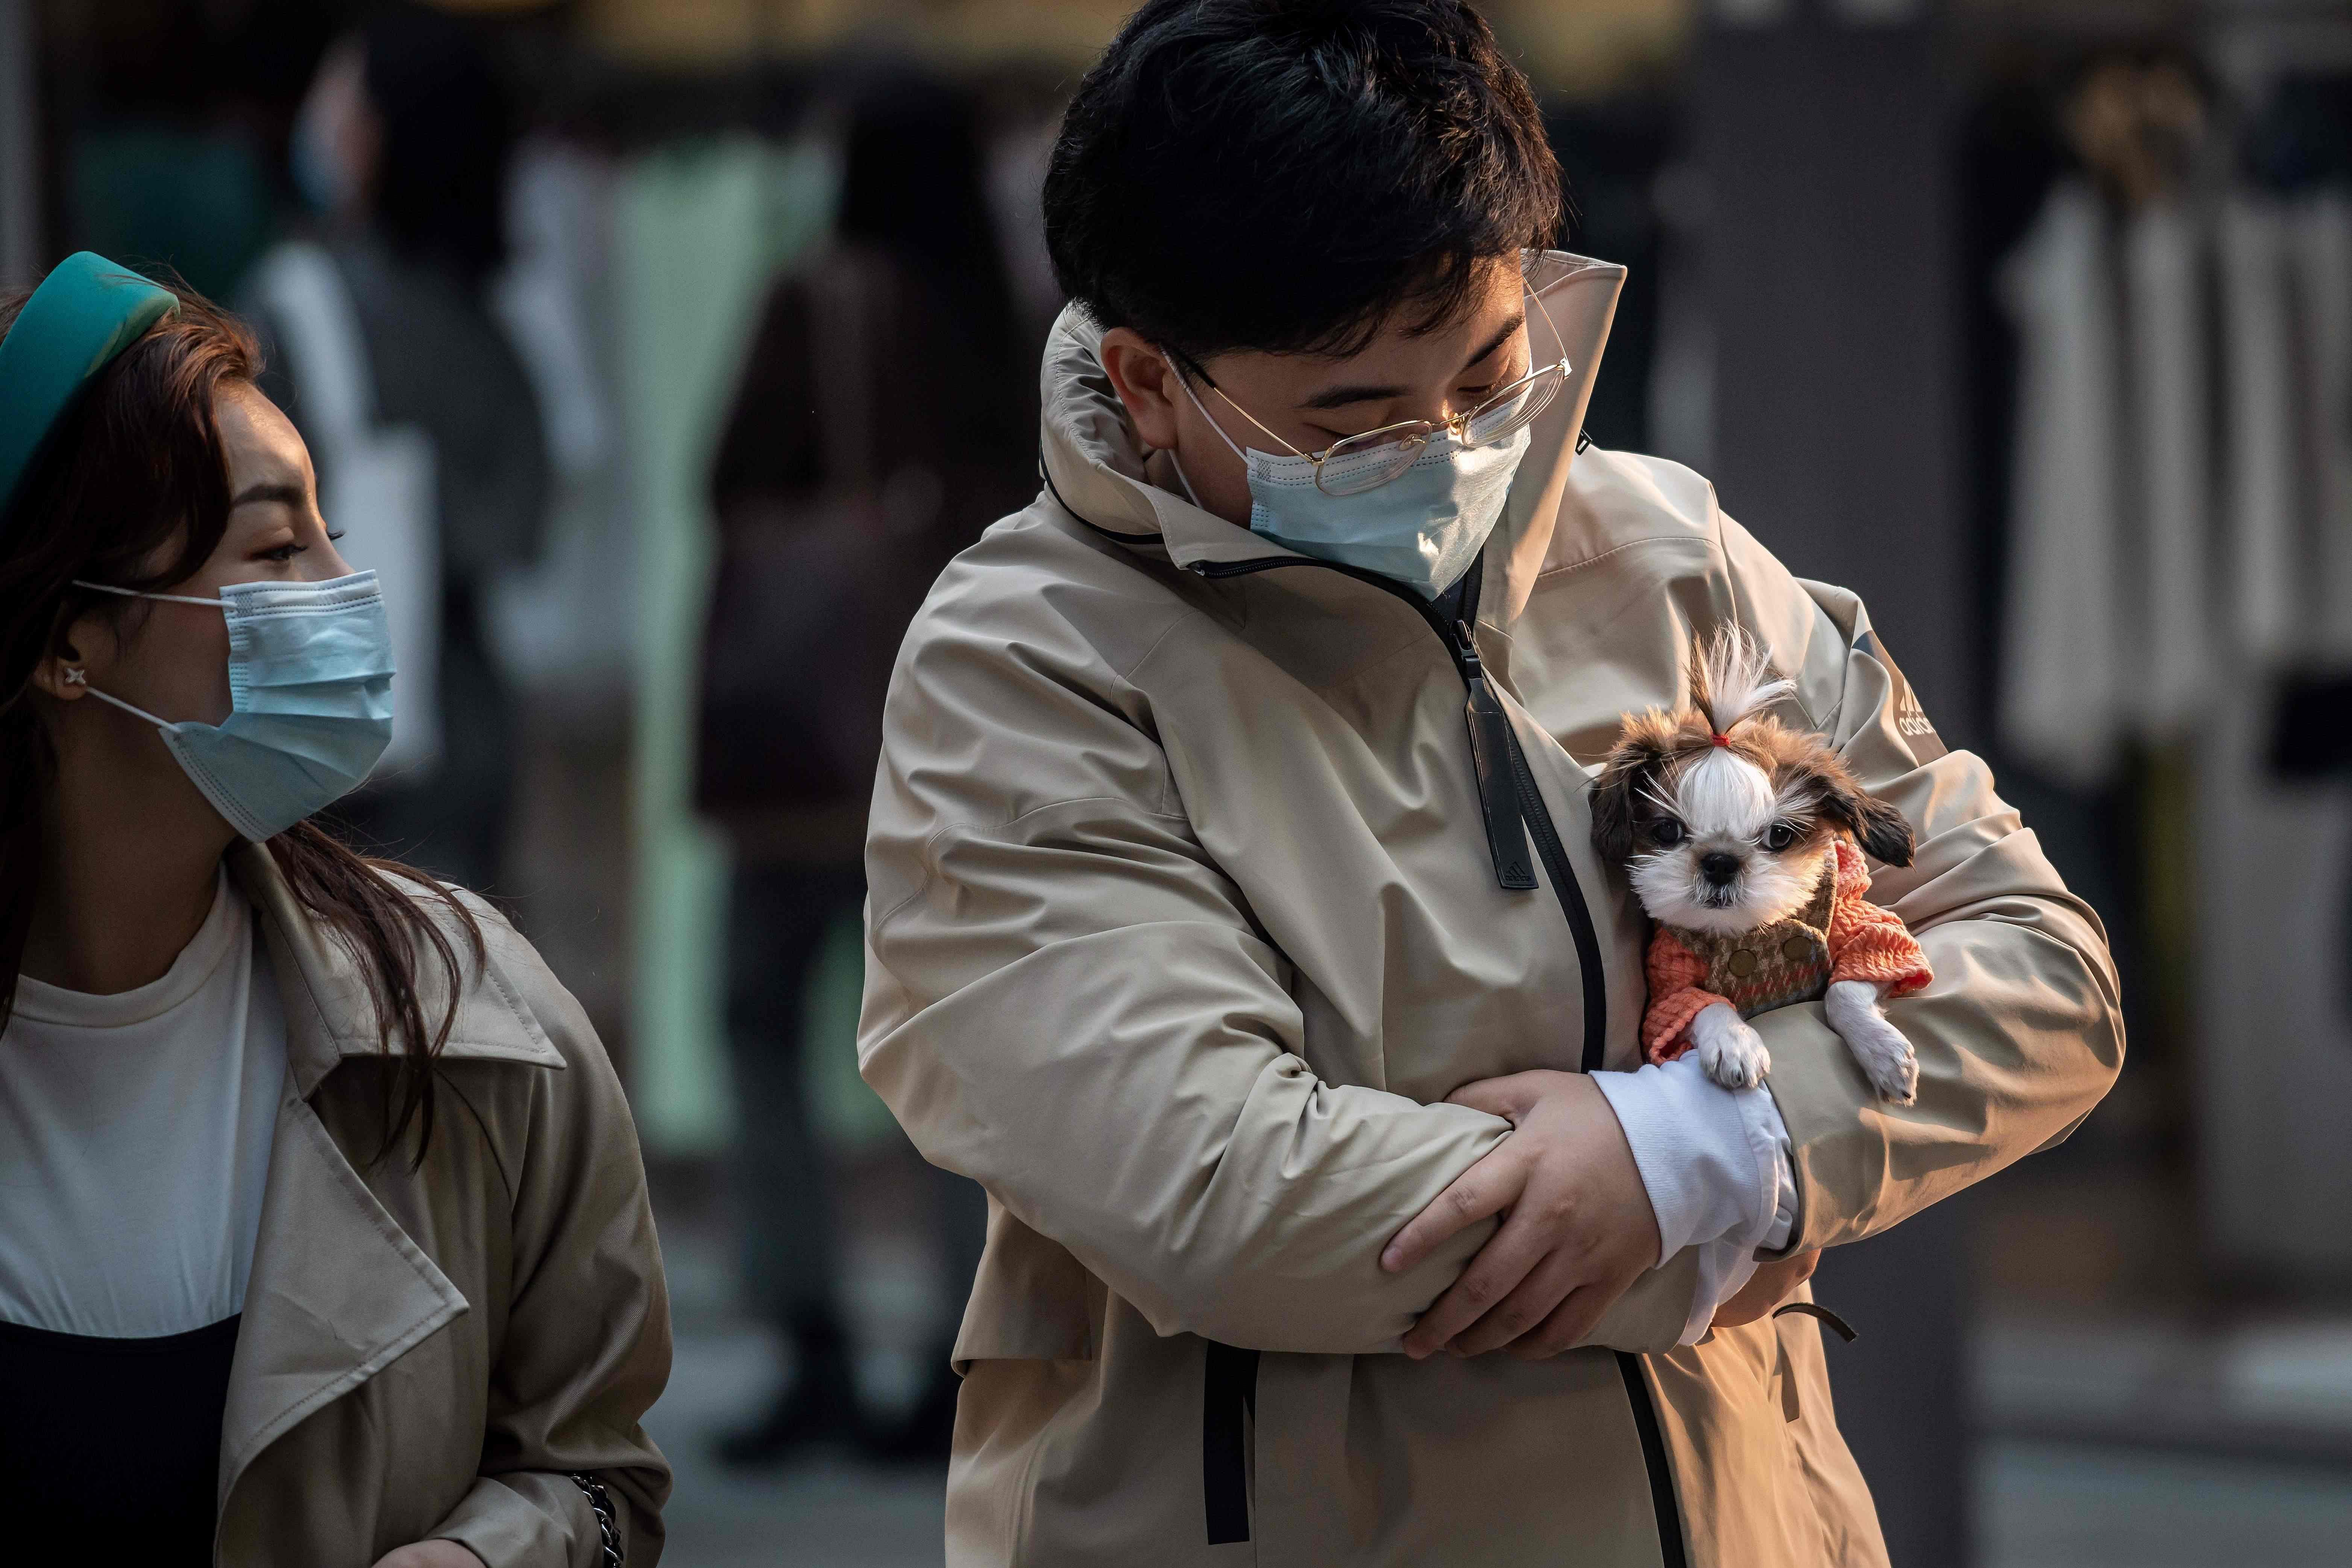 A man (R) wearing a facemask amid the concerns over the COVID-19 coronavirus holds a dog as he walks at a shopping mall in Beijing. (Credit: AFP)